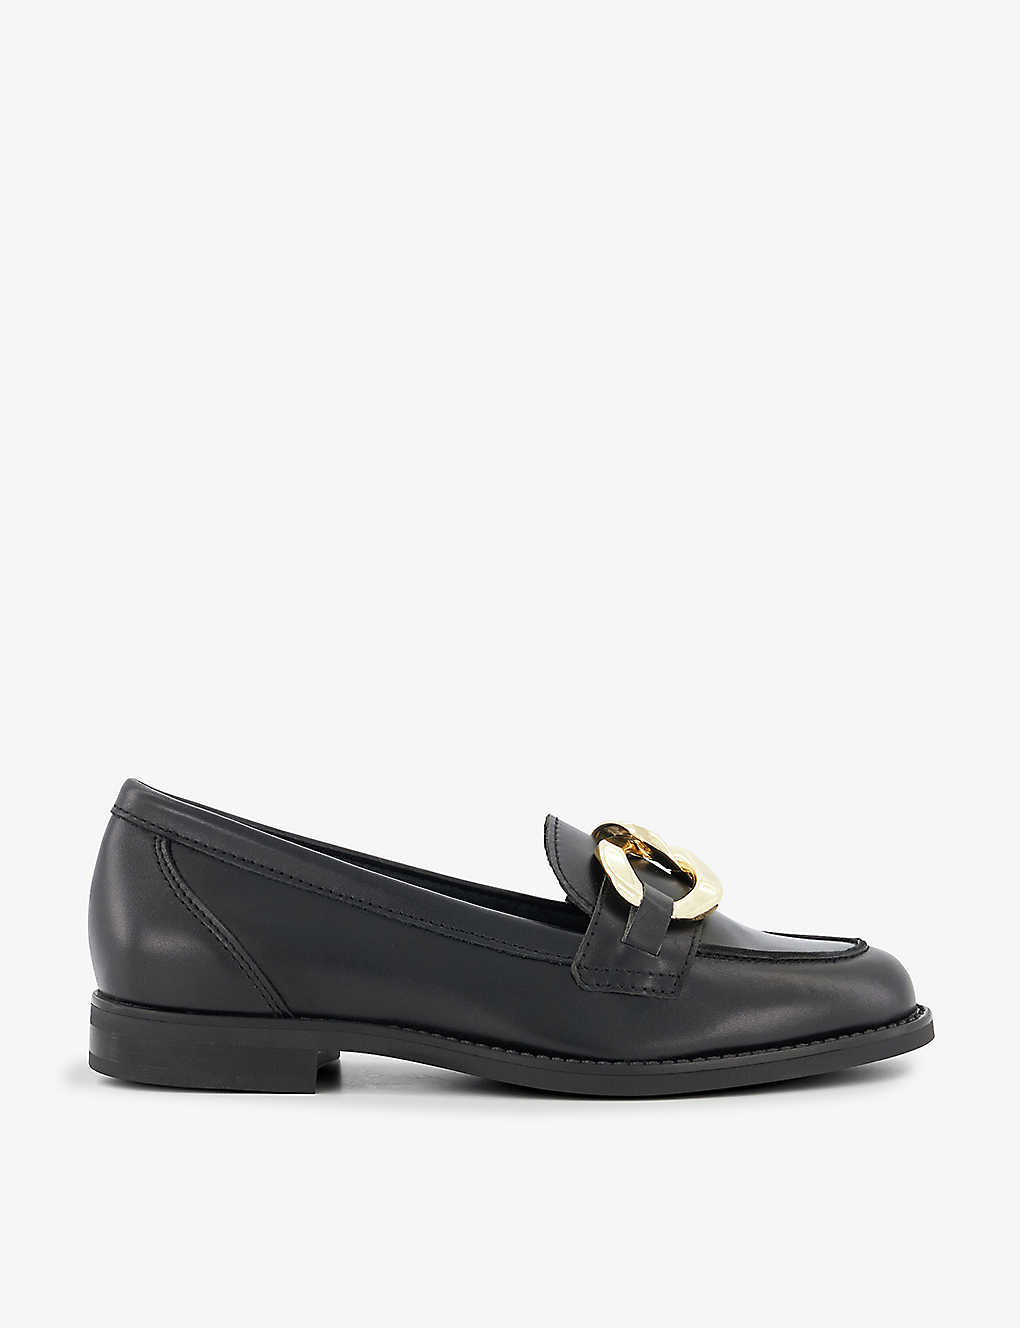 Dune Womens Black-leather Chain-detail Leather Loafers